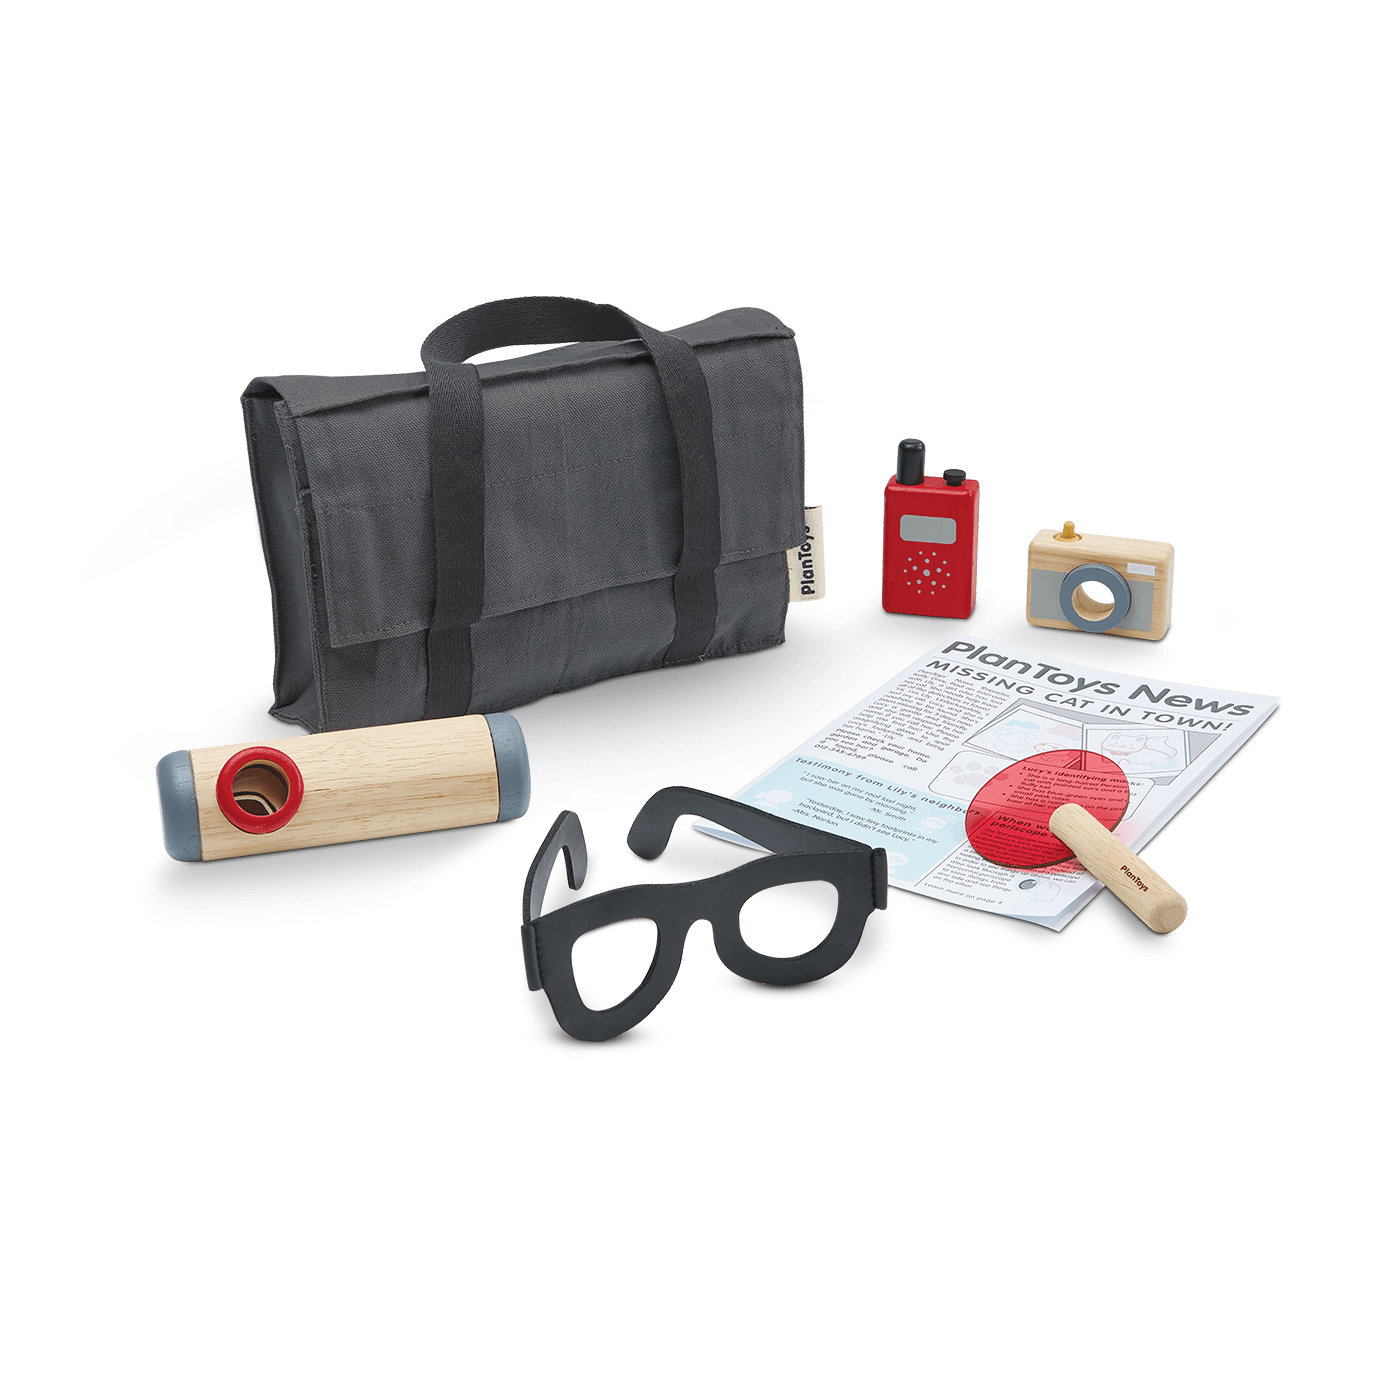 kids detective play set featuring a black briefcase, newspaper, red walkie talkie, wooden camera, black glasses, and a red magnifying glass.